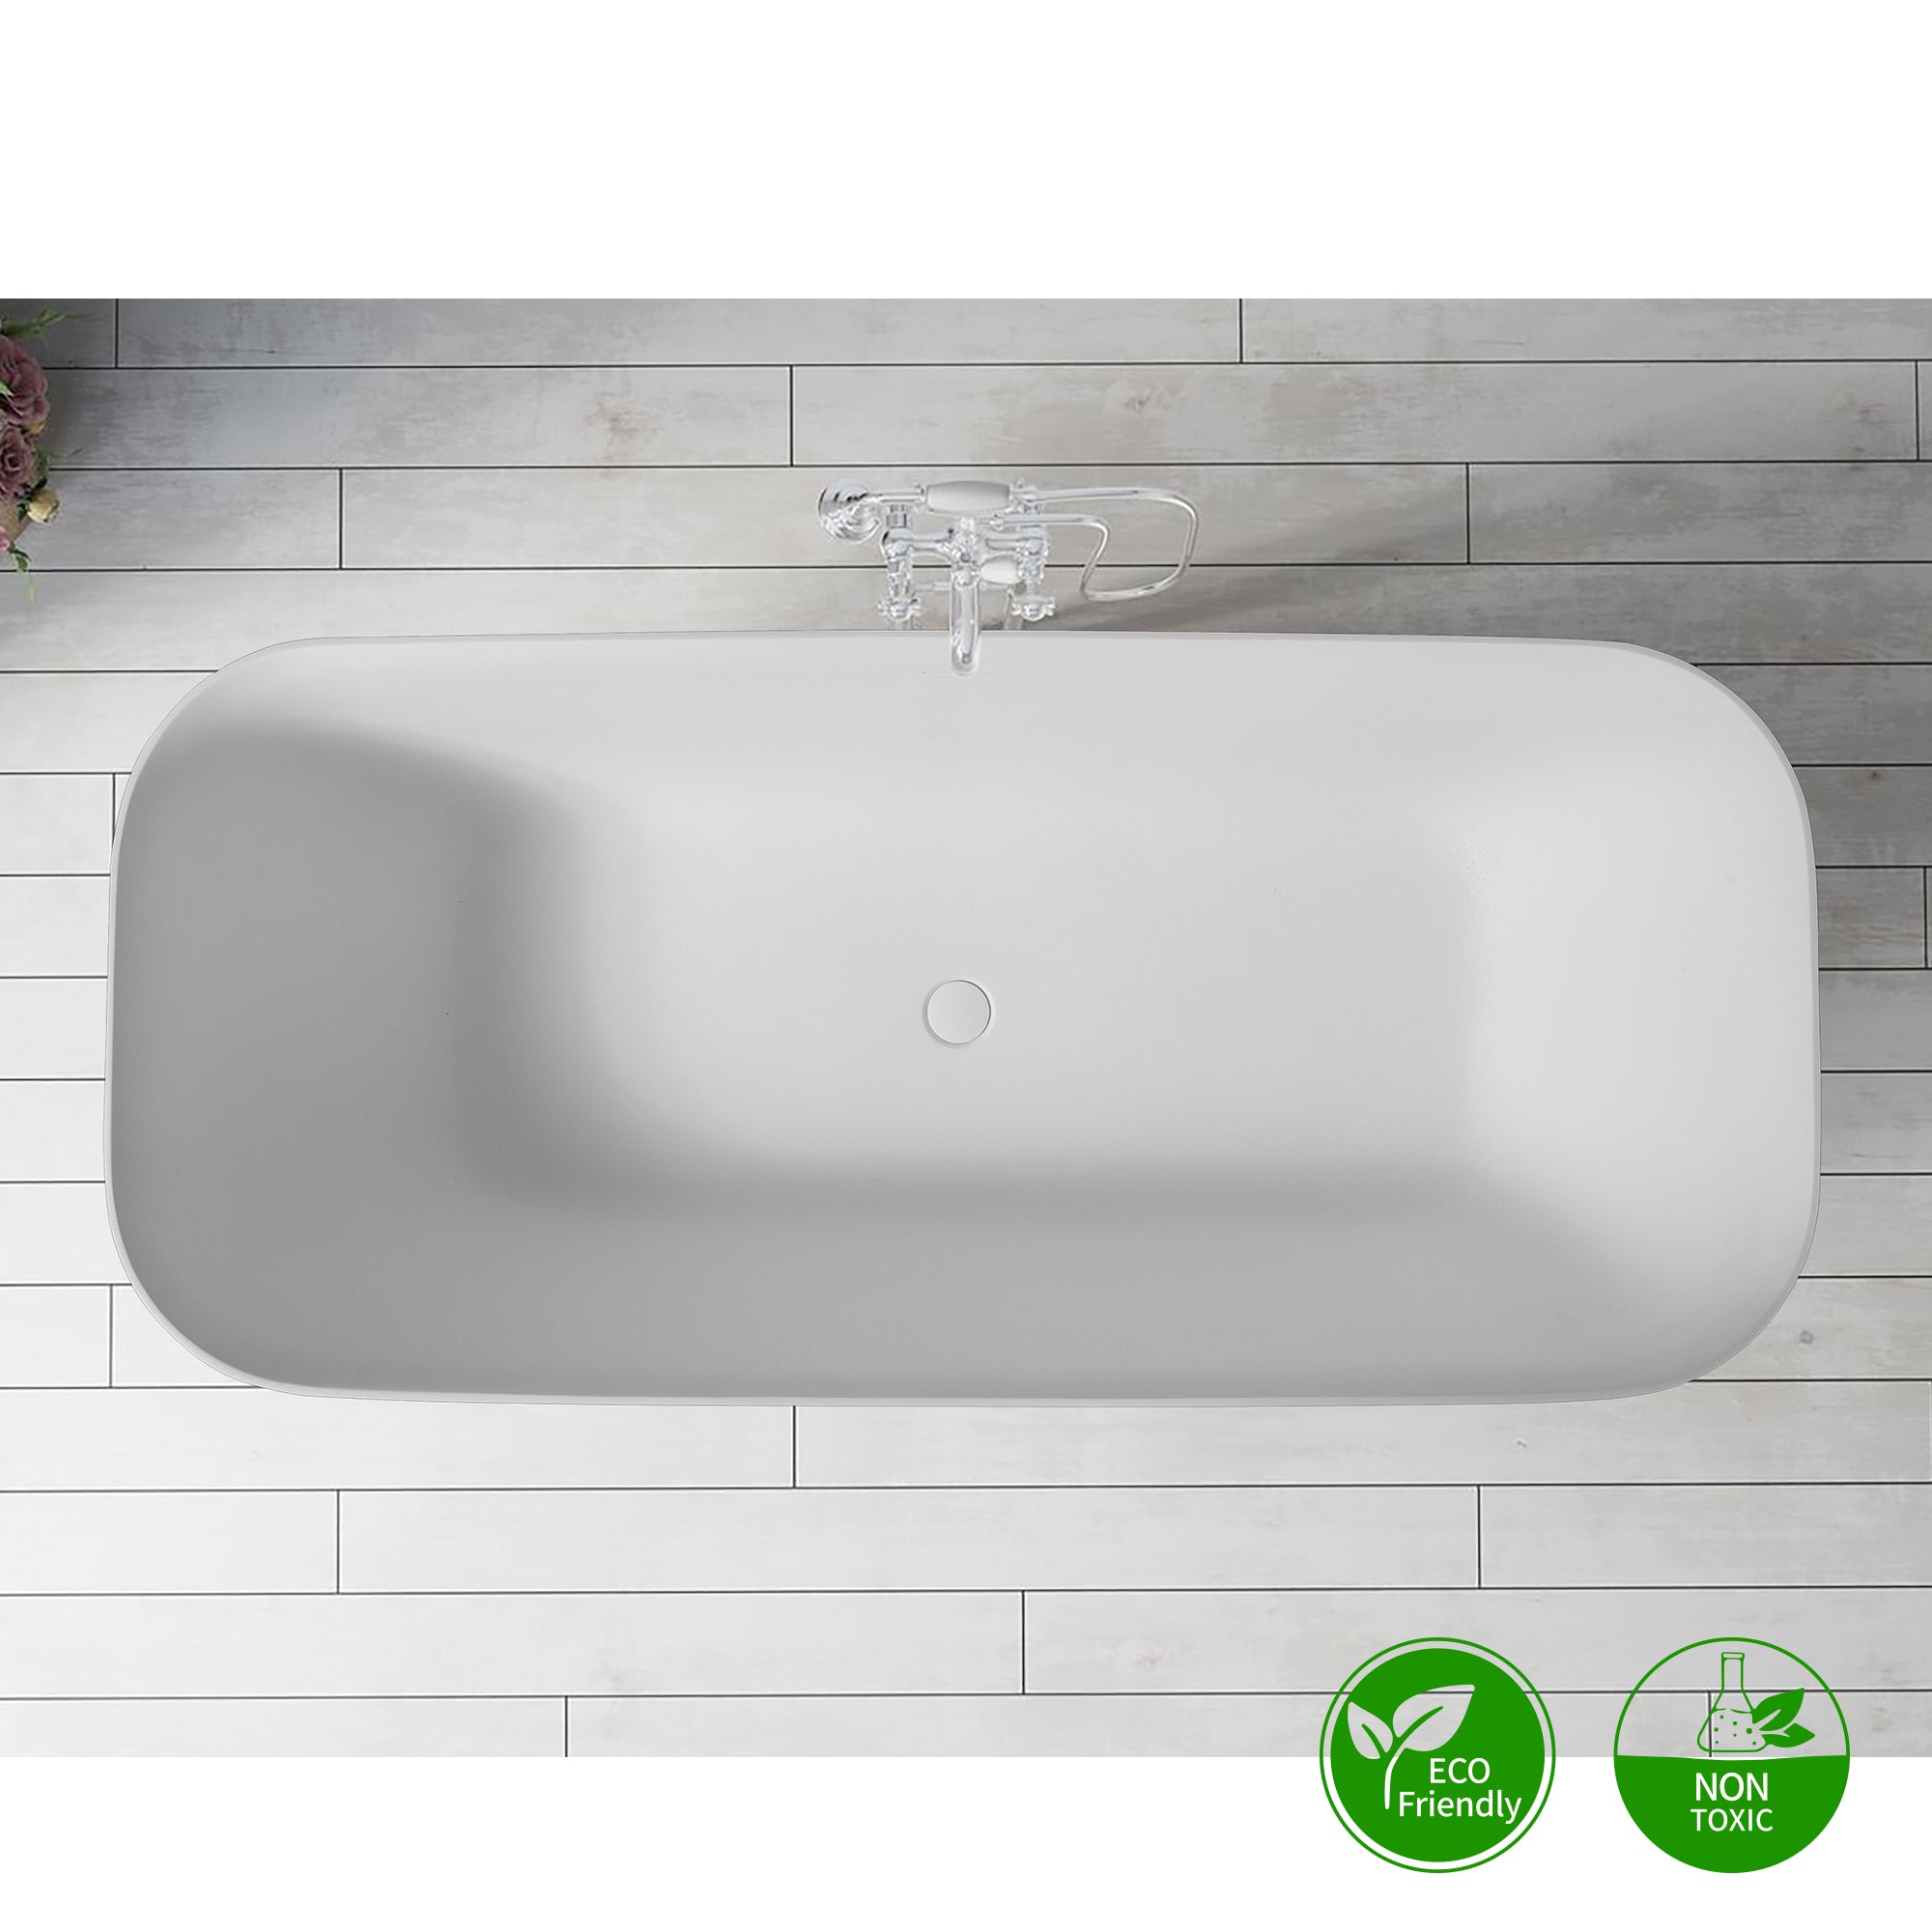 63" Oval Shaped Freestanding Solid Surface Soaking Bathtub with Overflow RX-S14-63